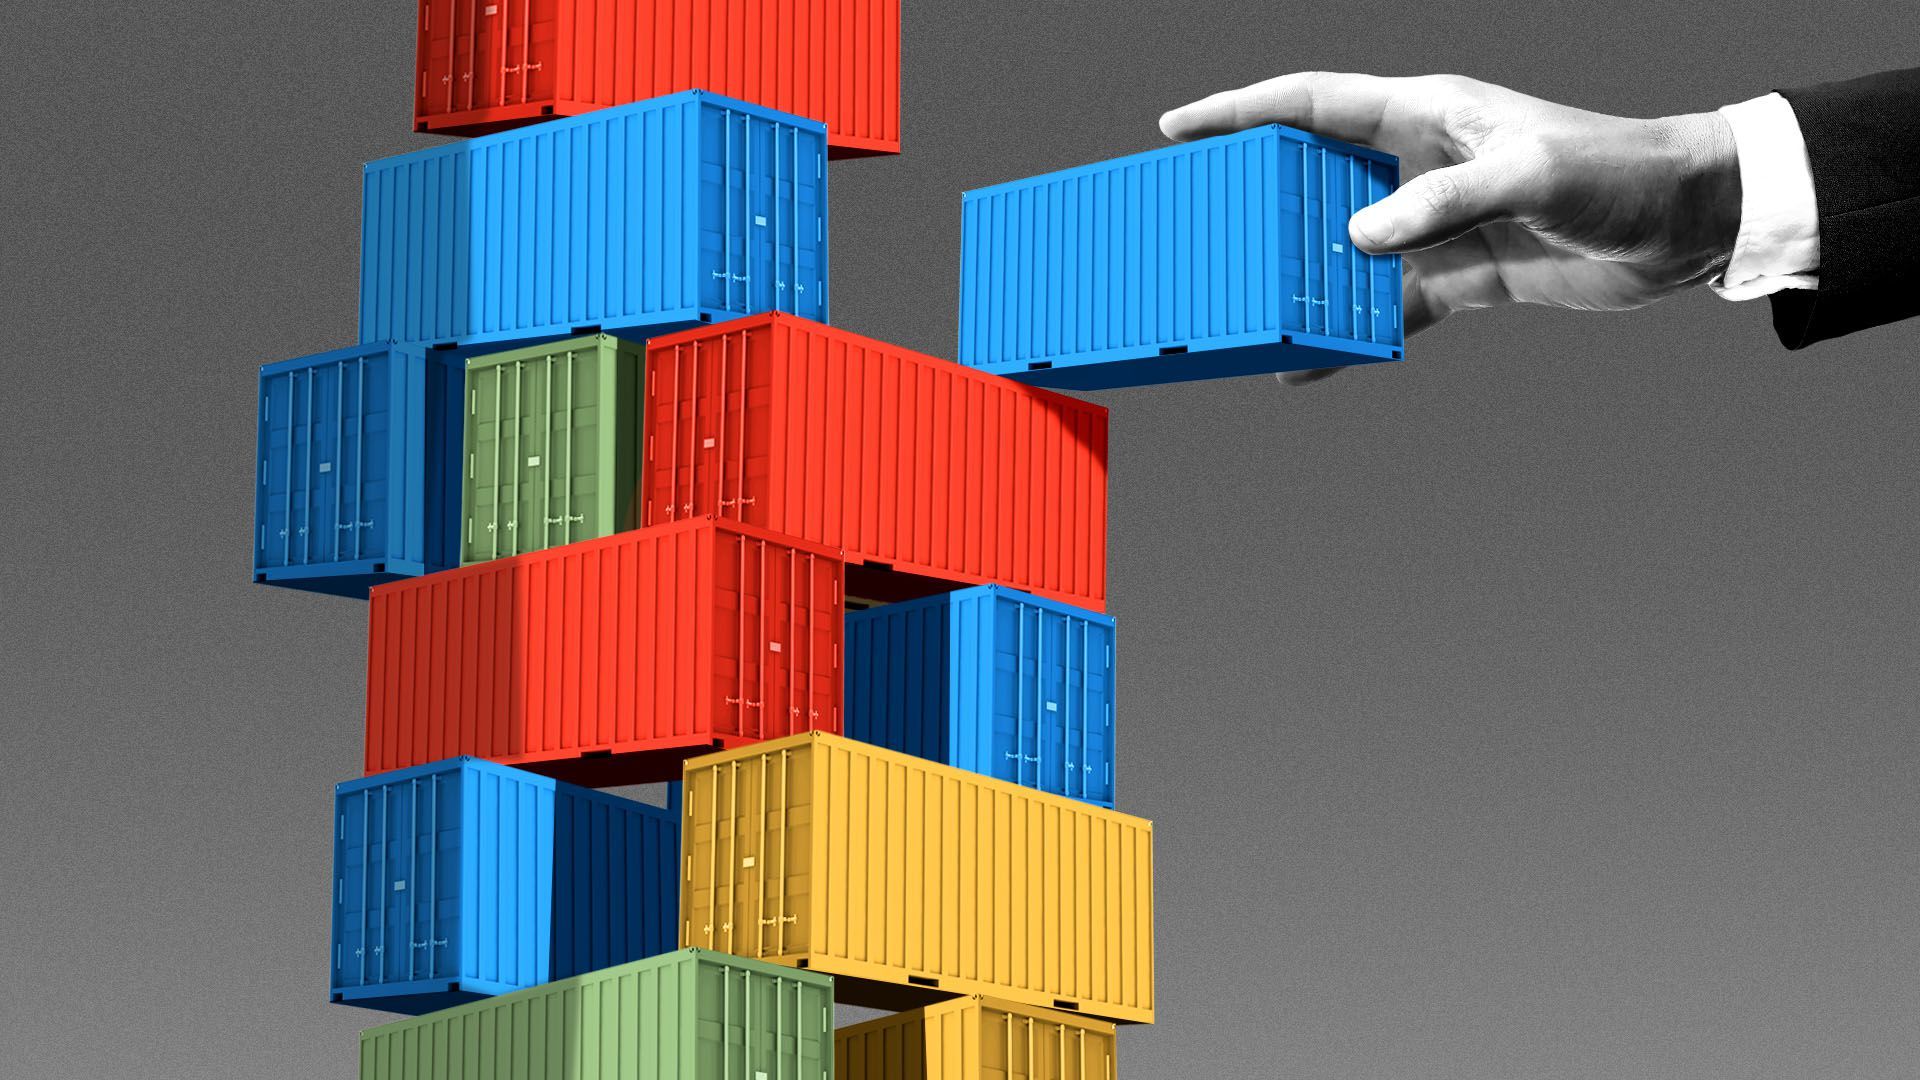 Illustration of shipping containers sacked like Jenga blocks with a hand removing one